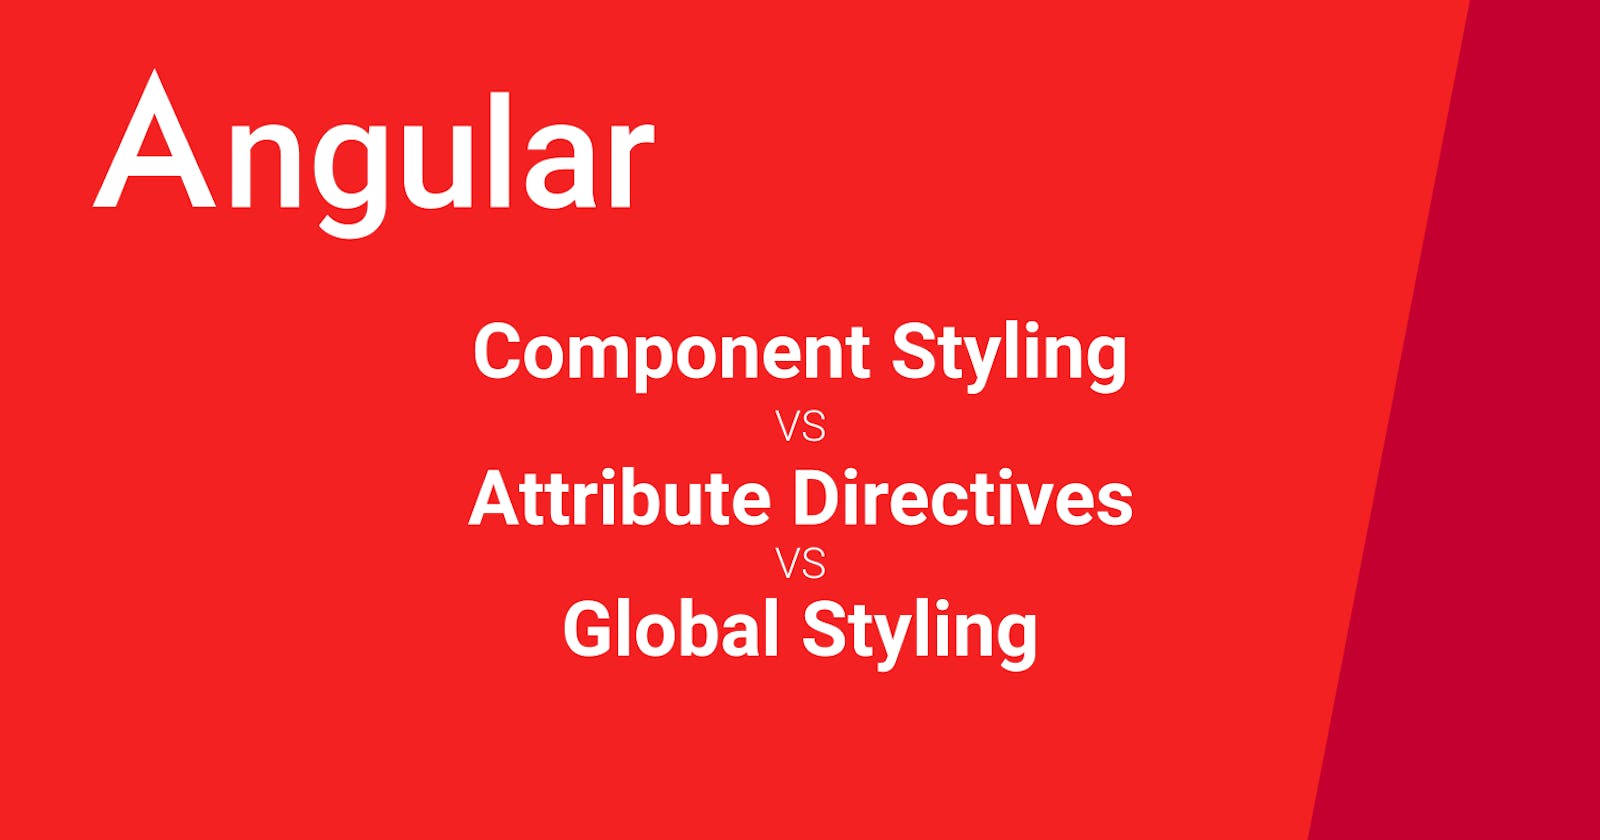 Component Styling vs. Attribute Directives vs. Global Styling, which to use?